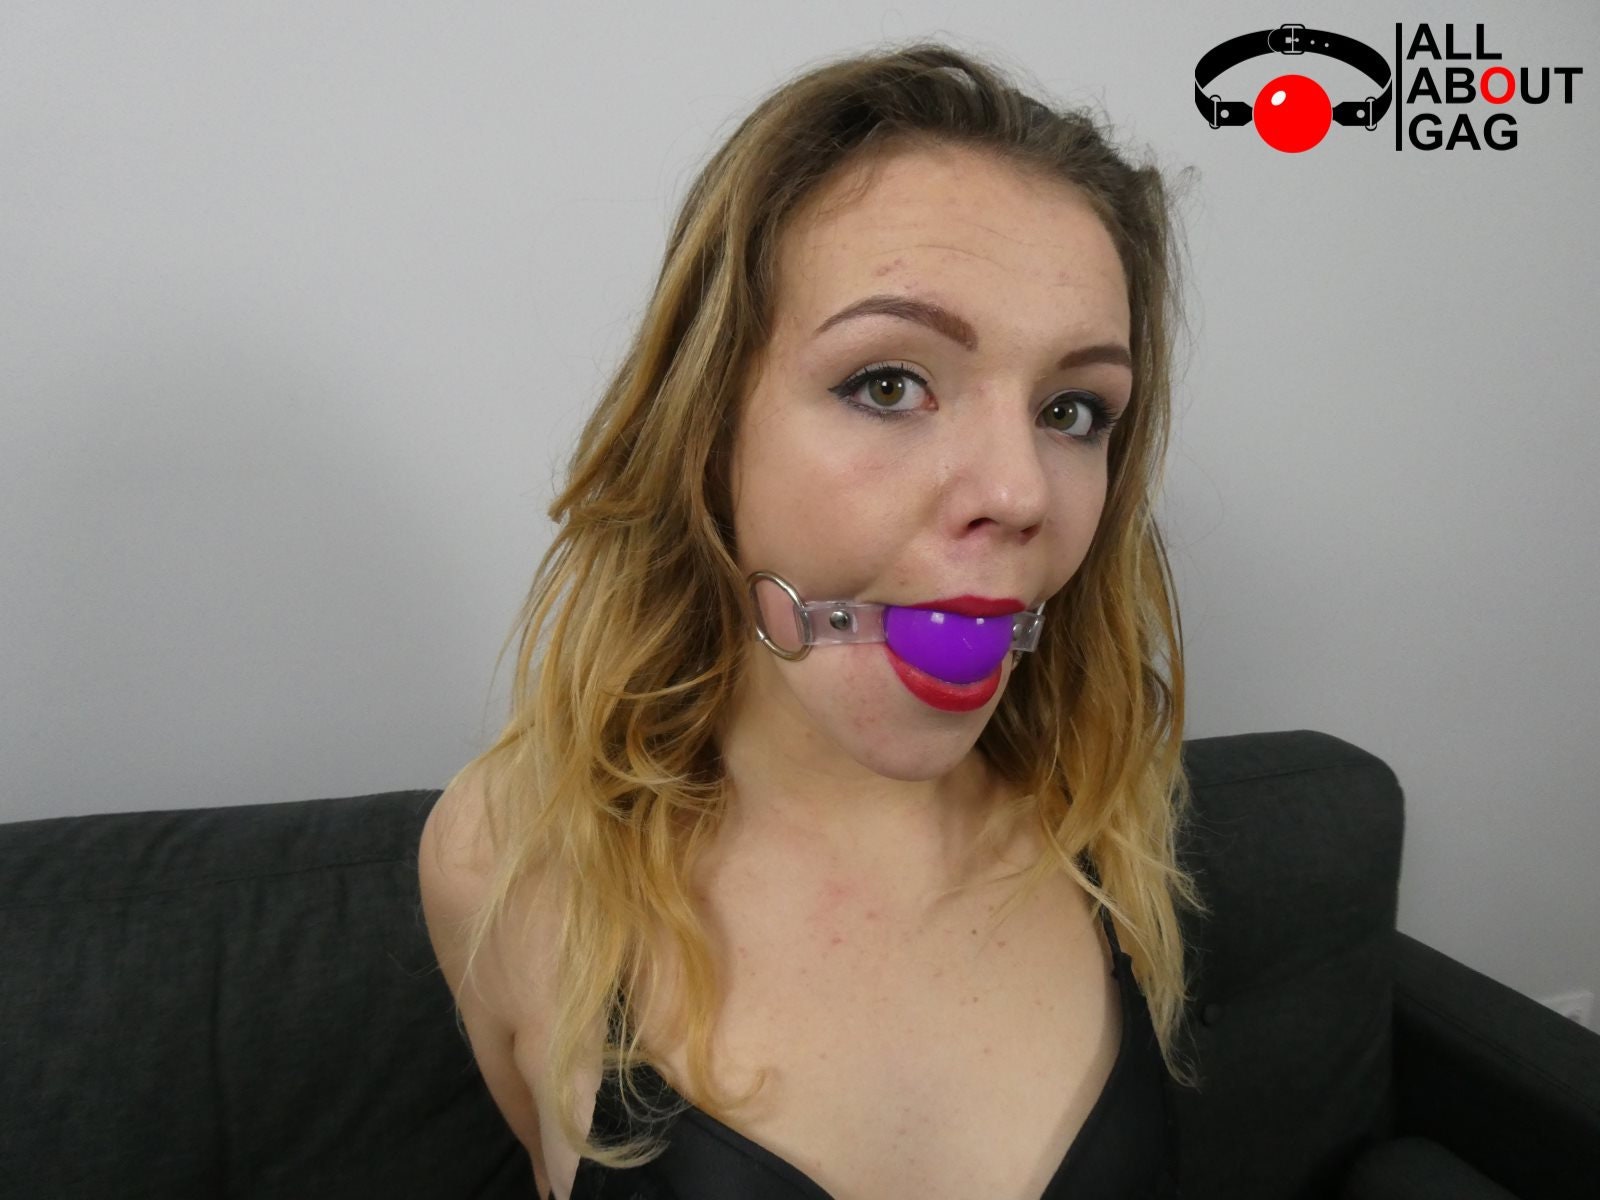 alisha ott recommends woman with ball gag pic